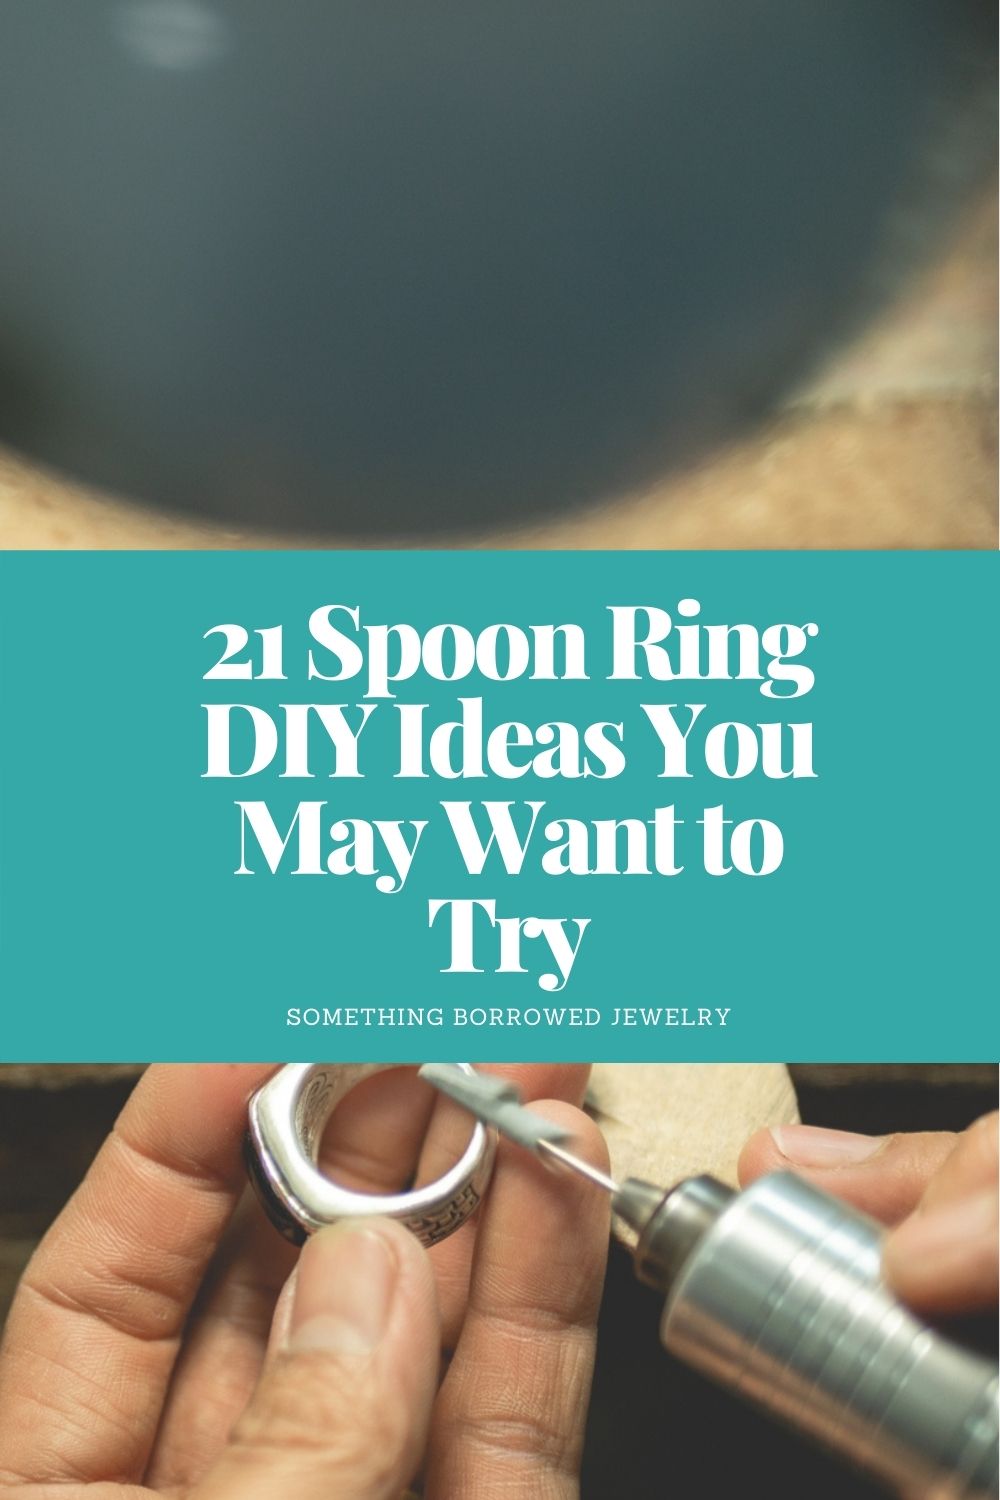 21 Spoon Ring DIY Ideas You May Want to Try pin 2